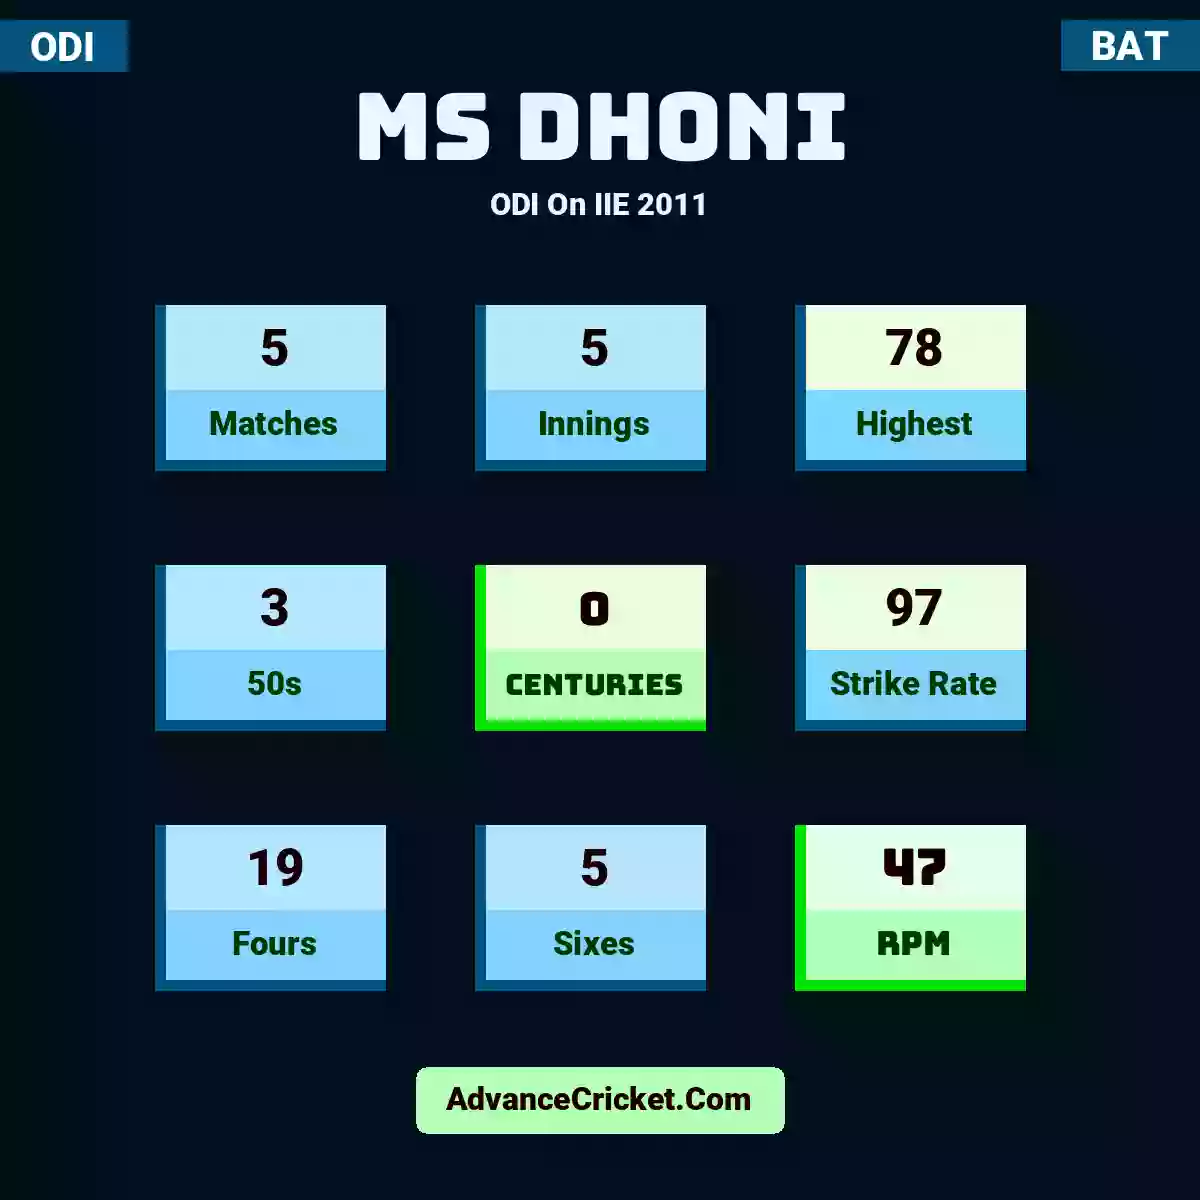 MS Dhoni ODI  On IIE 2011, MS Dhoni played 5 matches, scored 78 runs as highest, 3 half-centuries, and 0 centuries, with a strike rate of 97. M.Dhoni hit 19 fours and 5 sixes, with an RPM of 47.